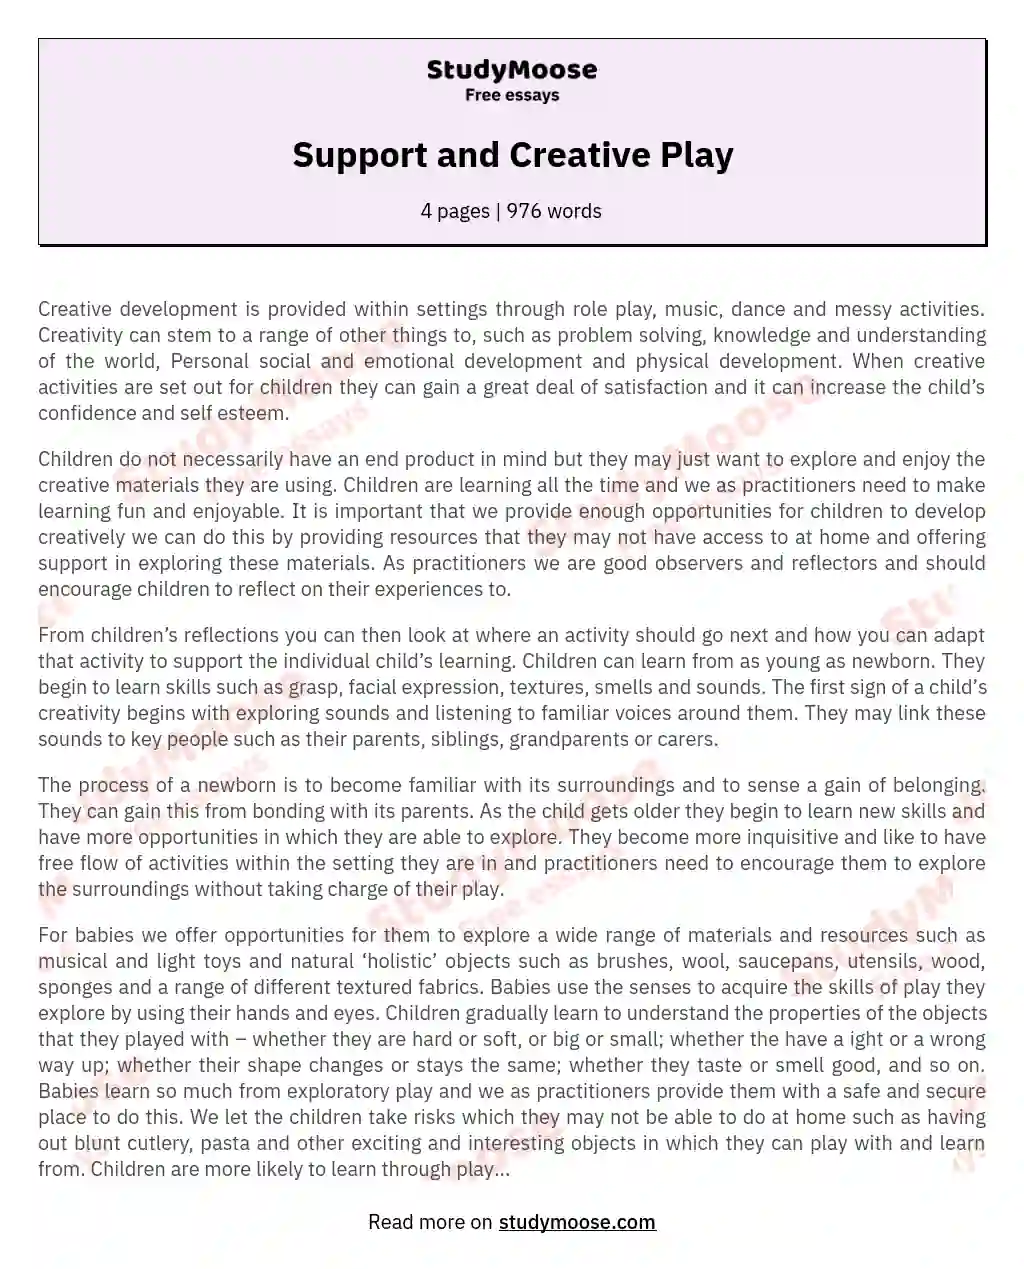 Support and Creative Play essay